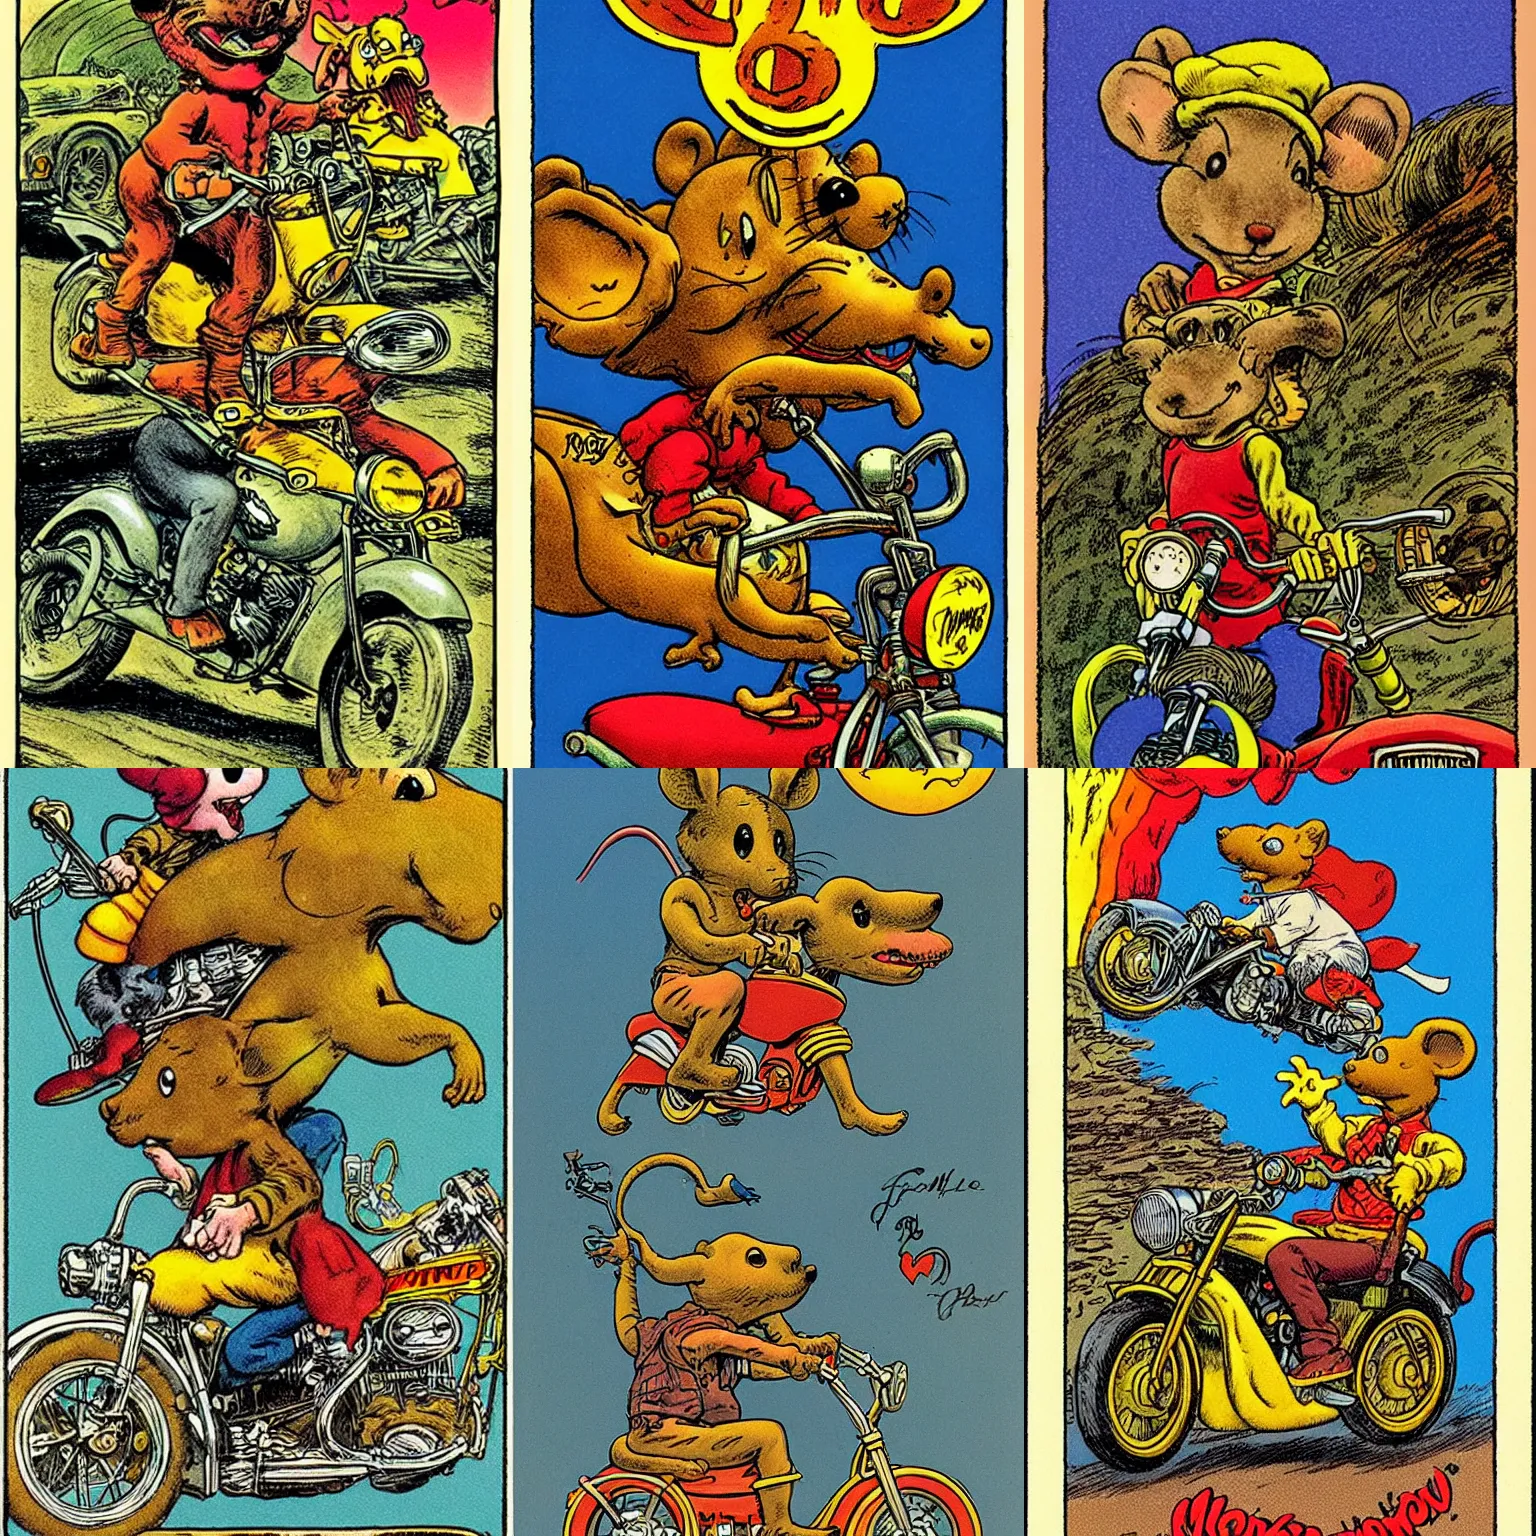 Prompt: a mouse in motorcycle, over the rainbow by Robert Crumb and Frank Frazetta, tarot card